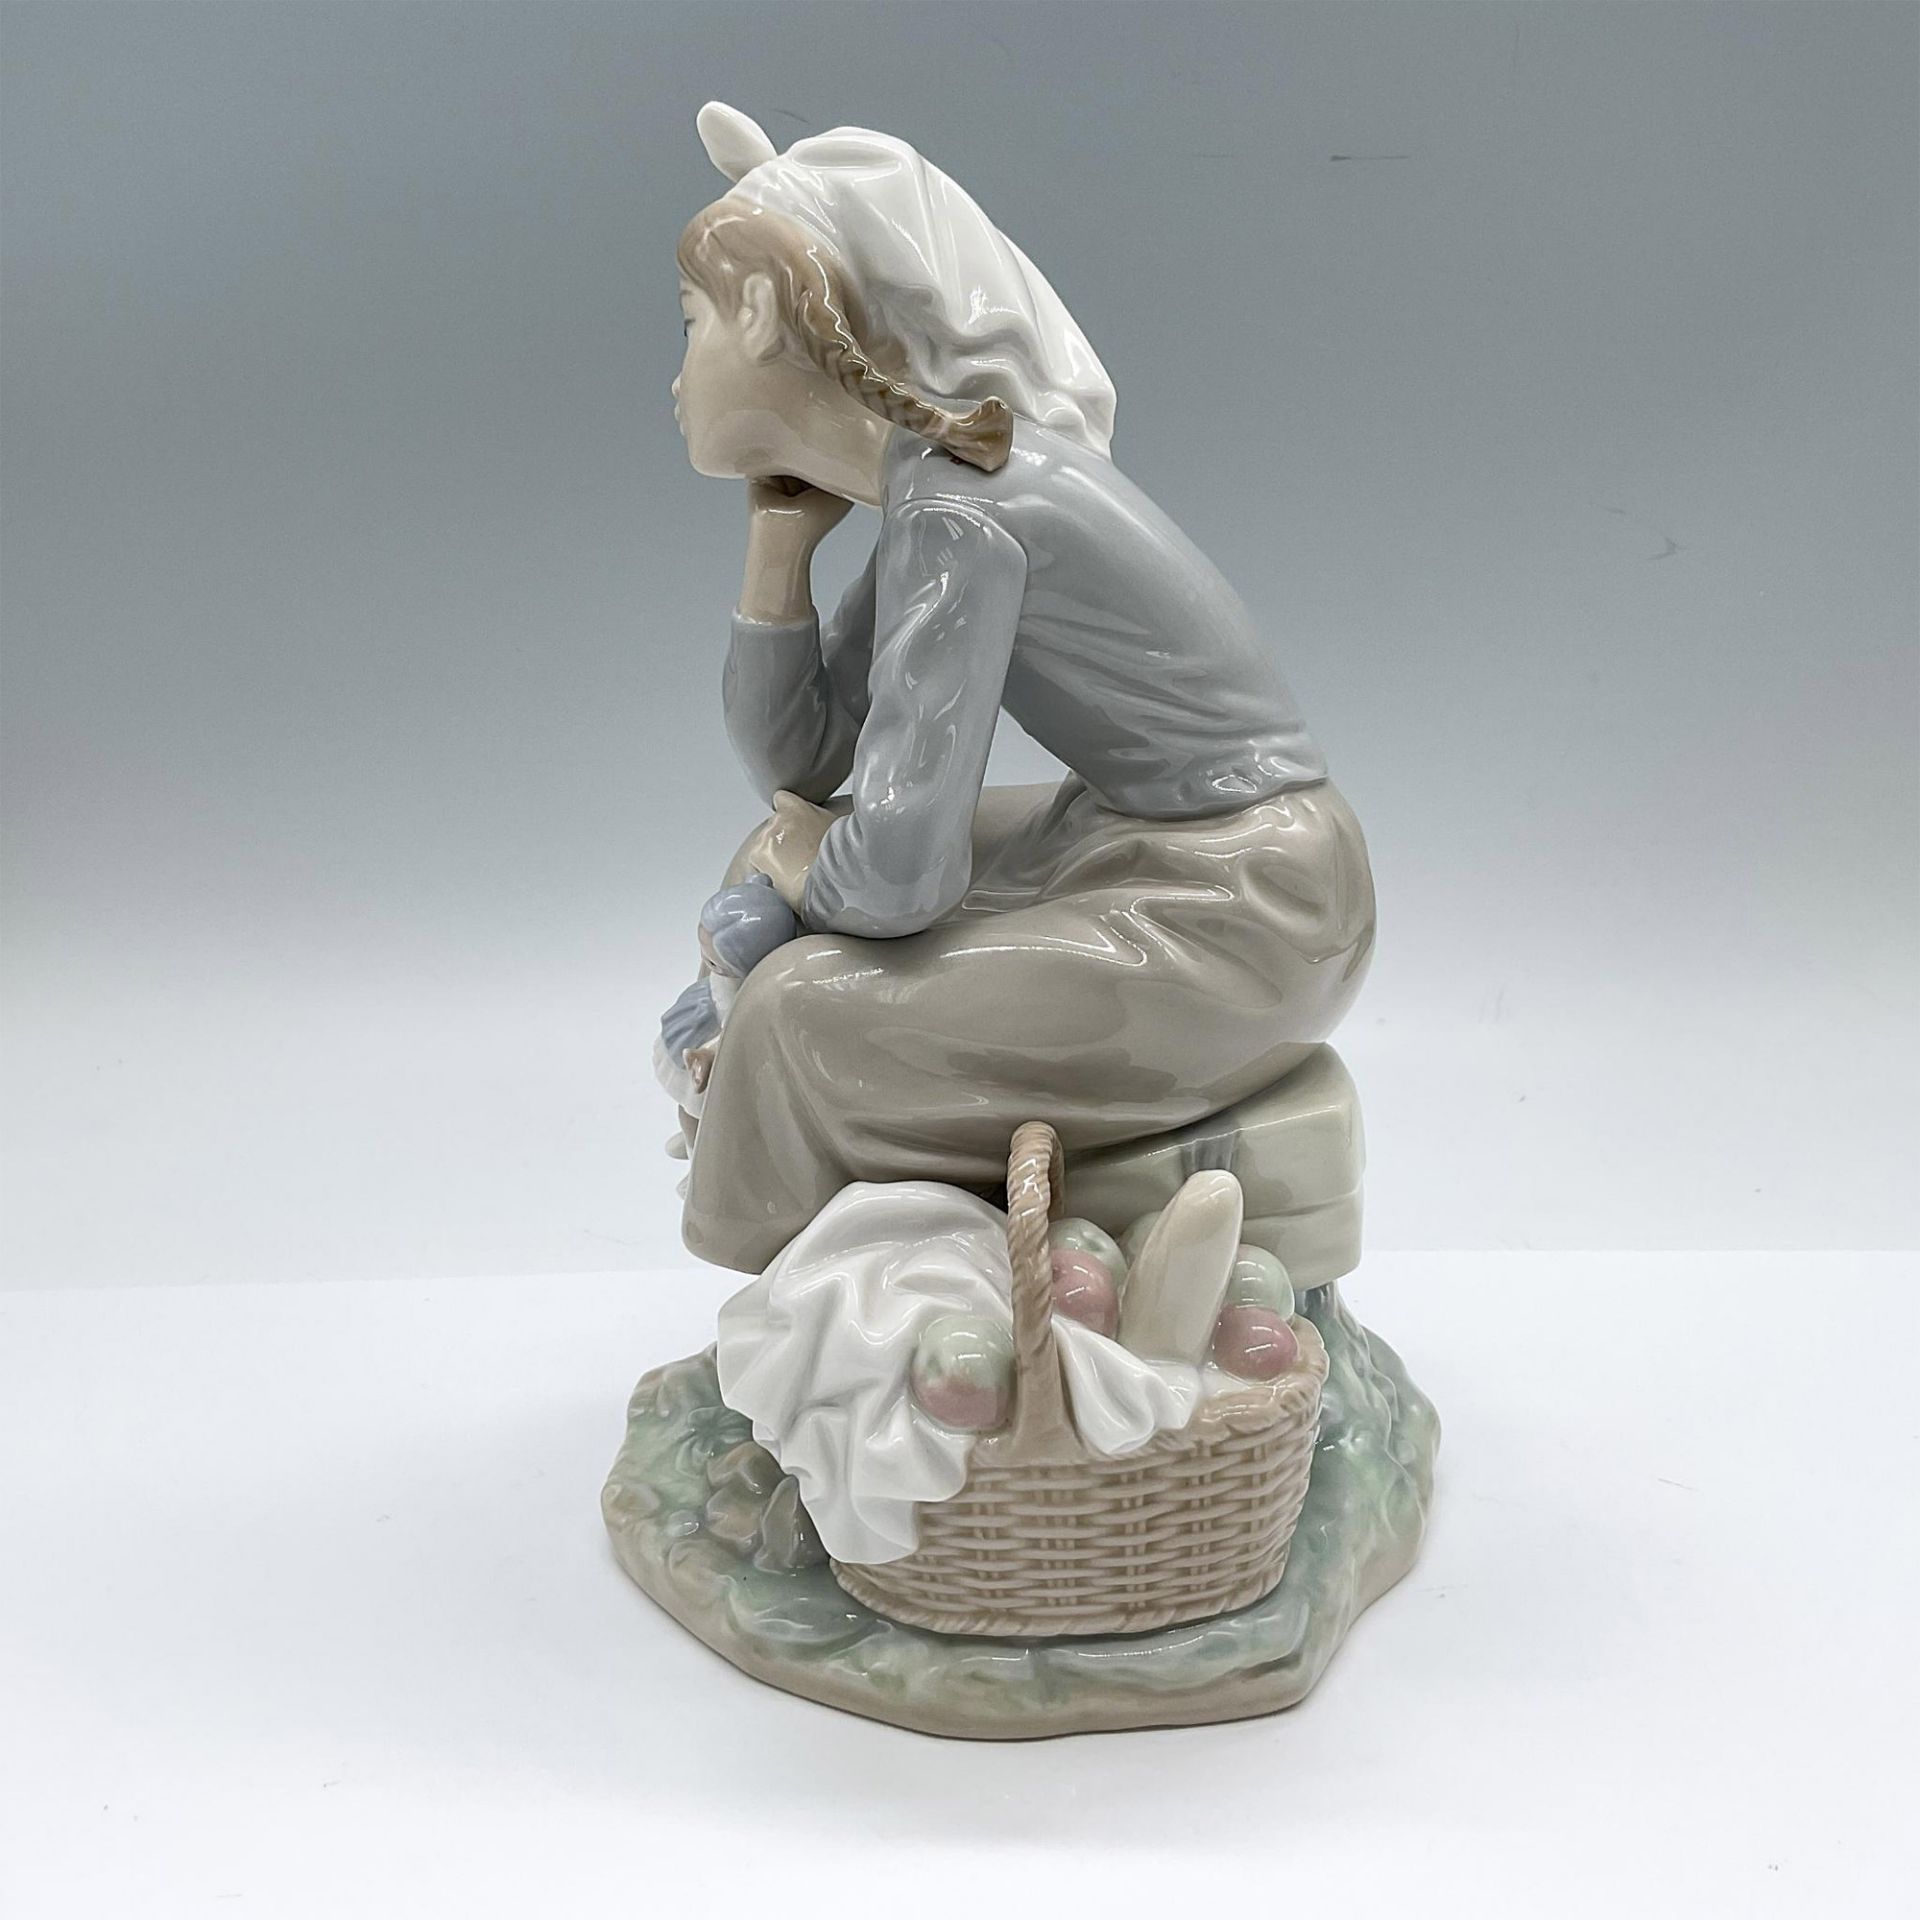 Lladro Porcelain Figurine, Girl With Doll 1001211 - Image 3 of 5